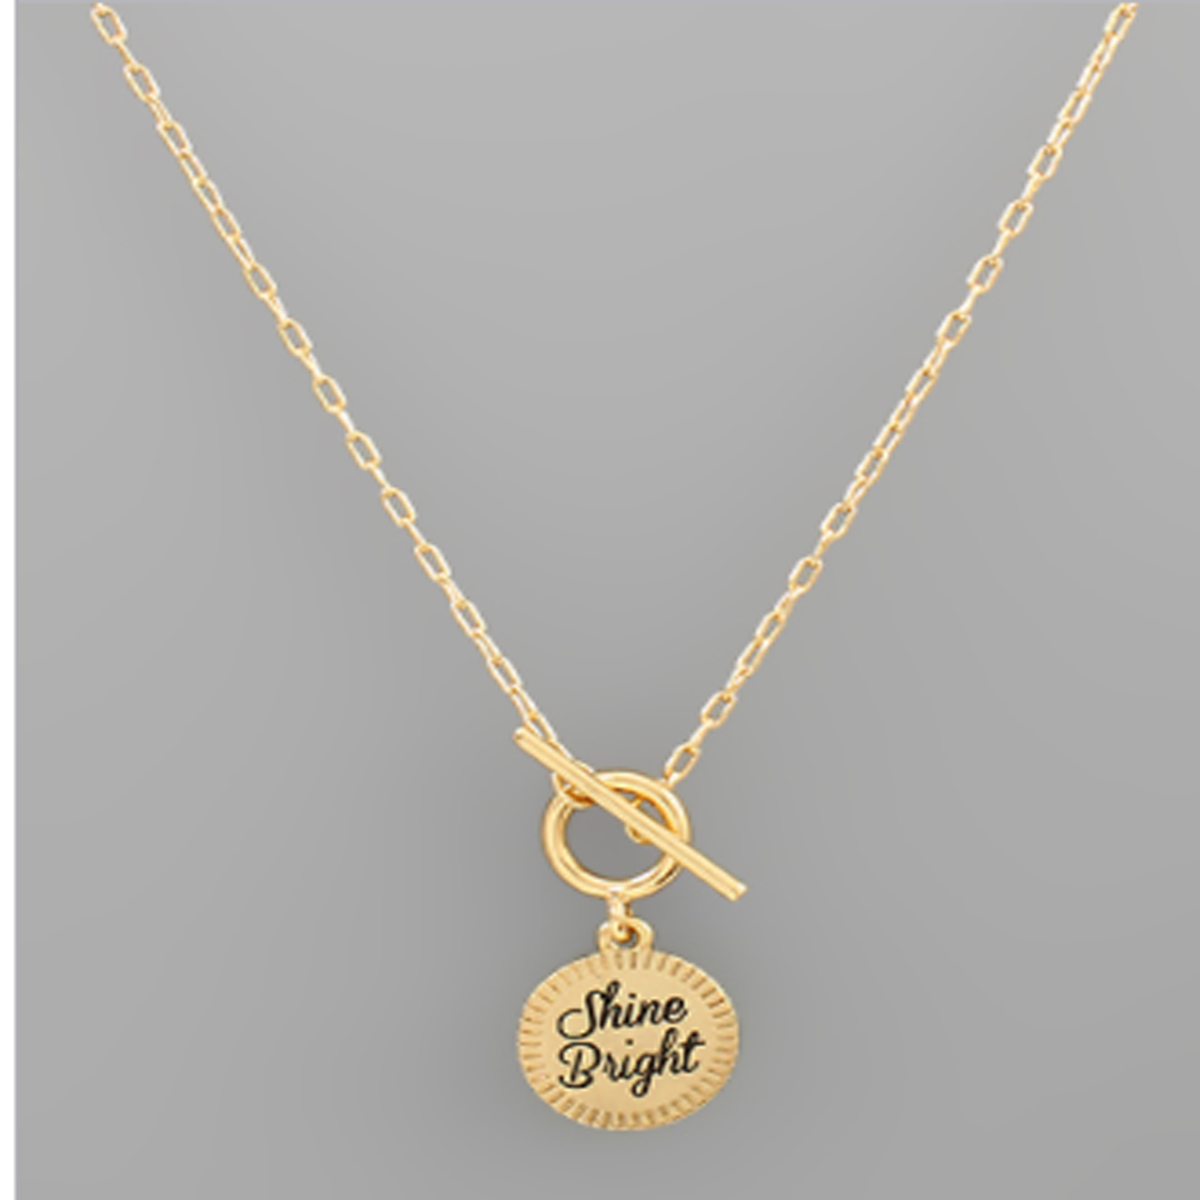 Gold Shine Bright Disk Necklace - Southern Grace Creations